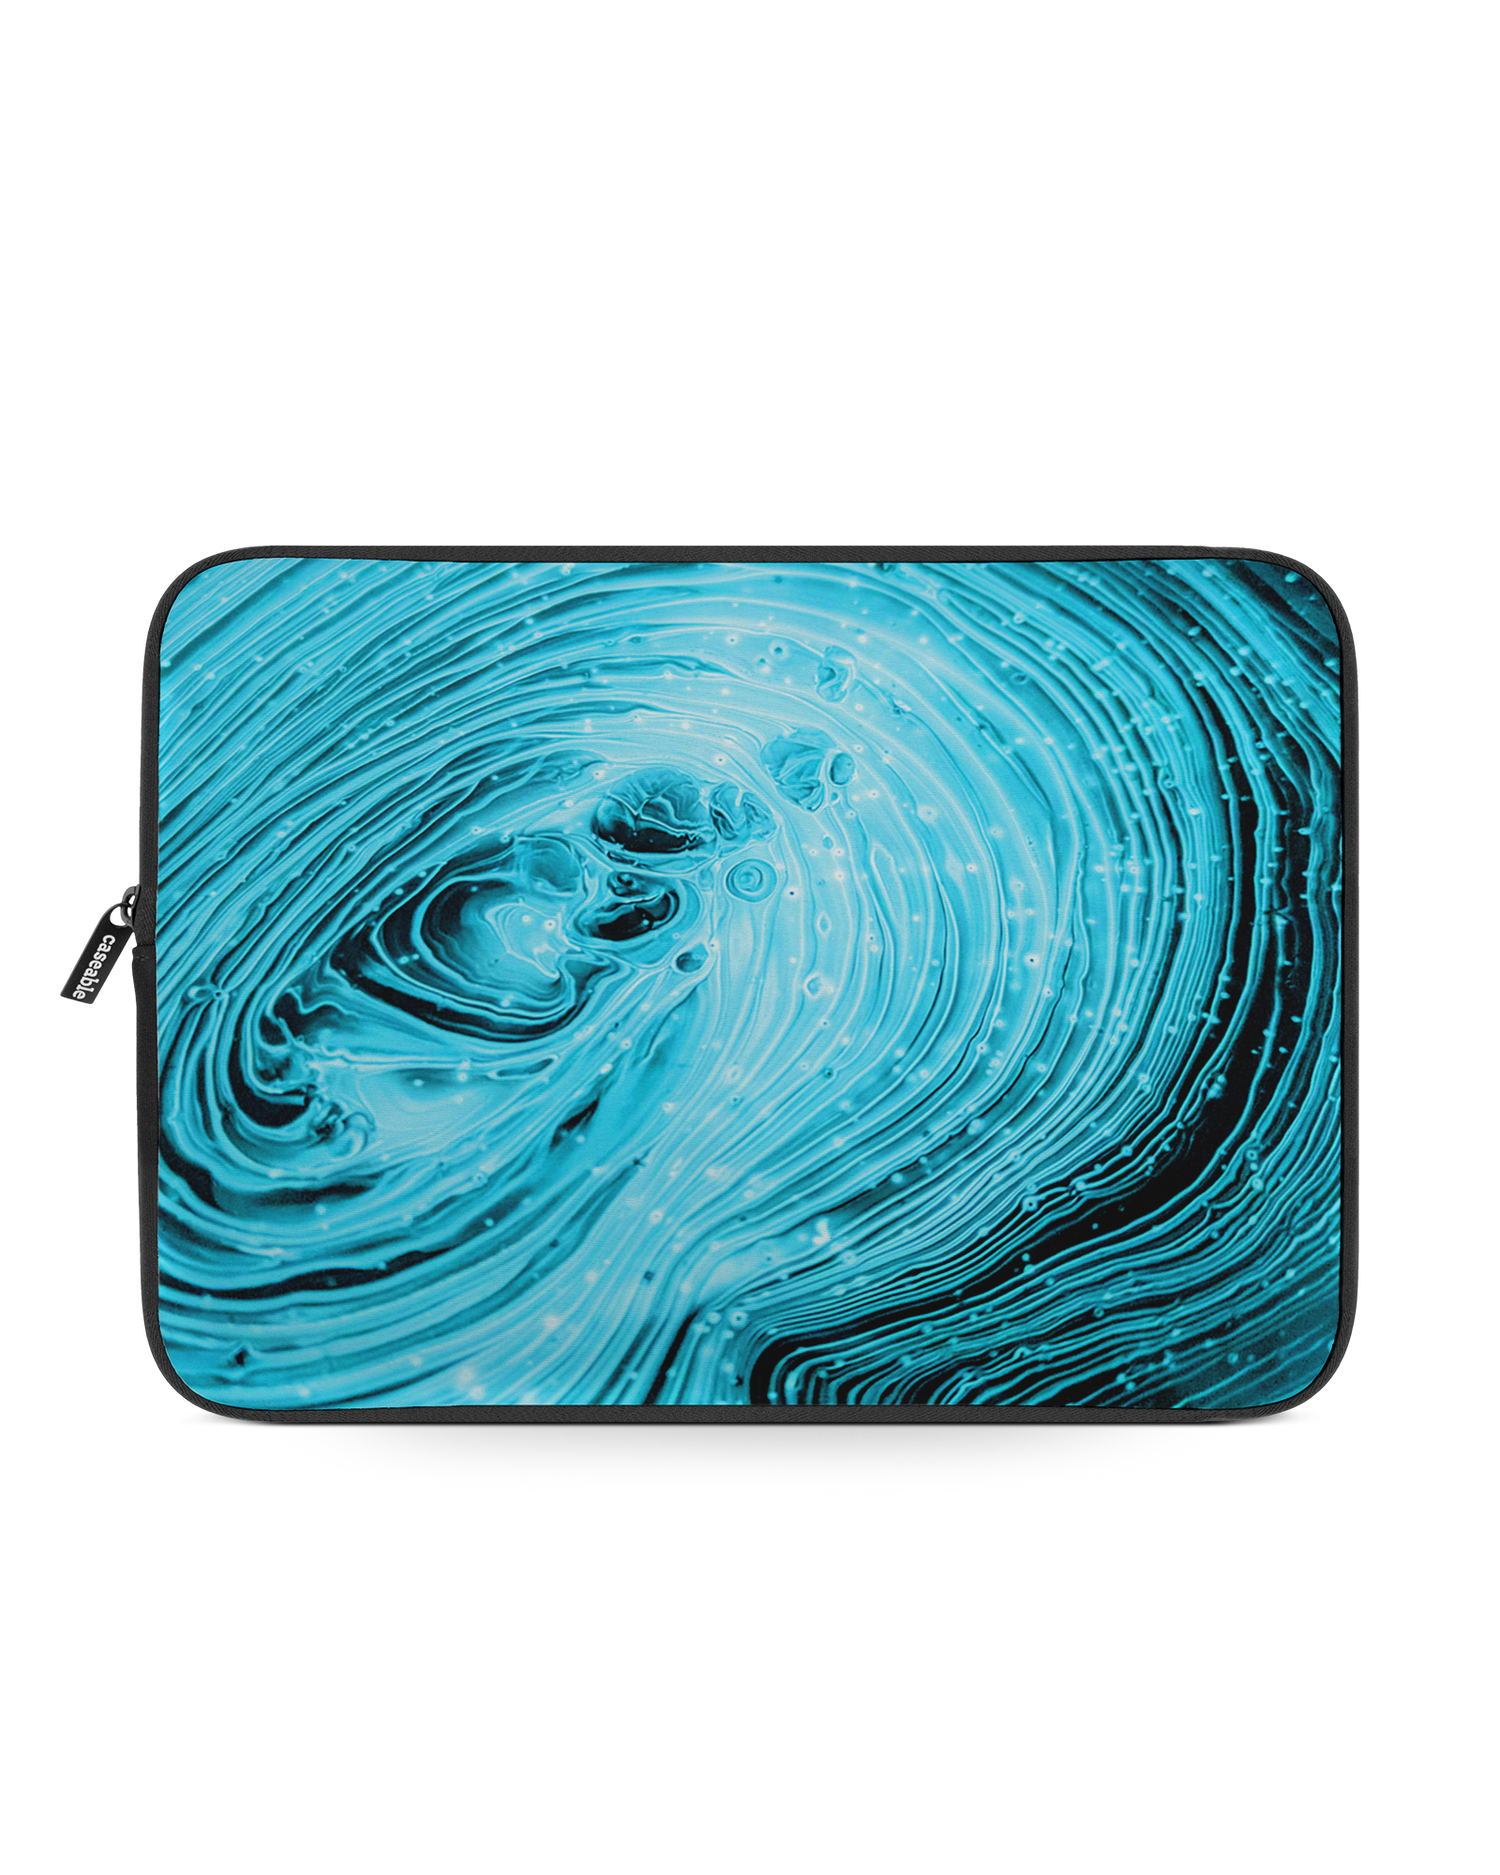 Turquoise Ripples Laptop Case 13-14 inch: Front View